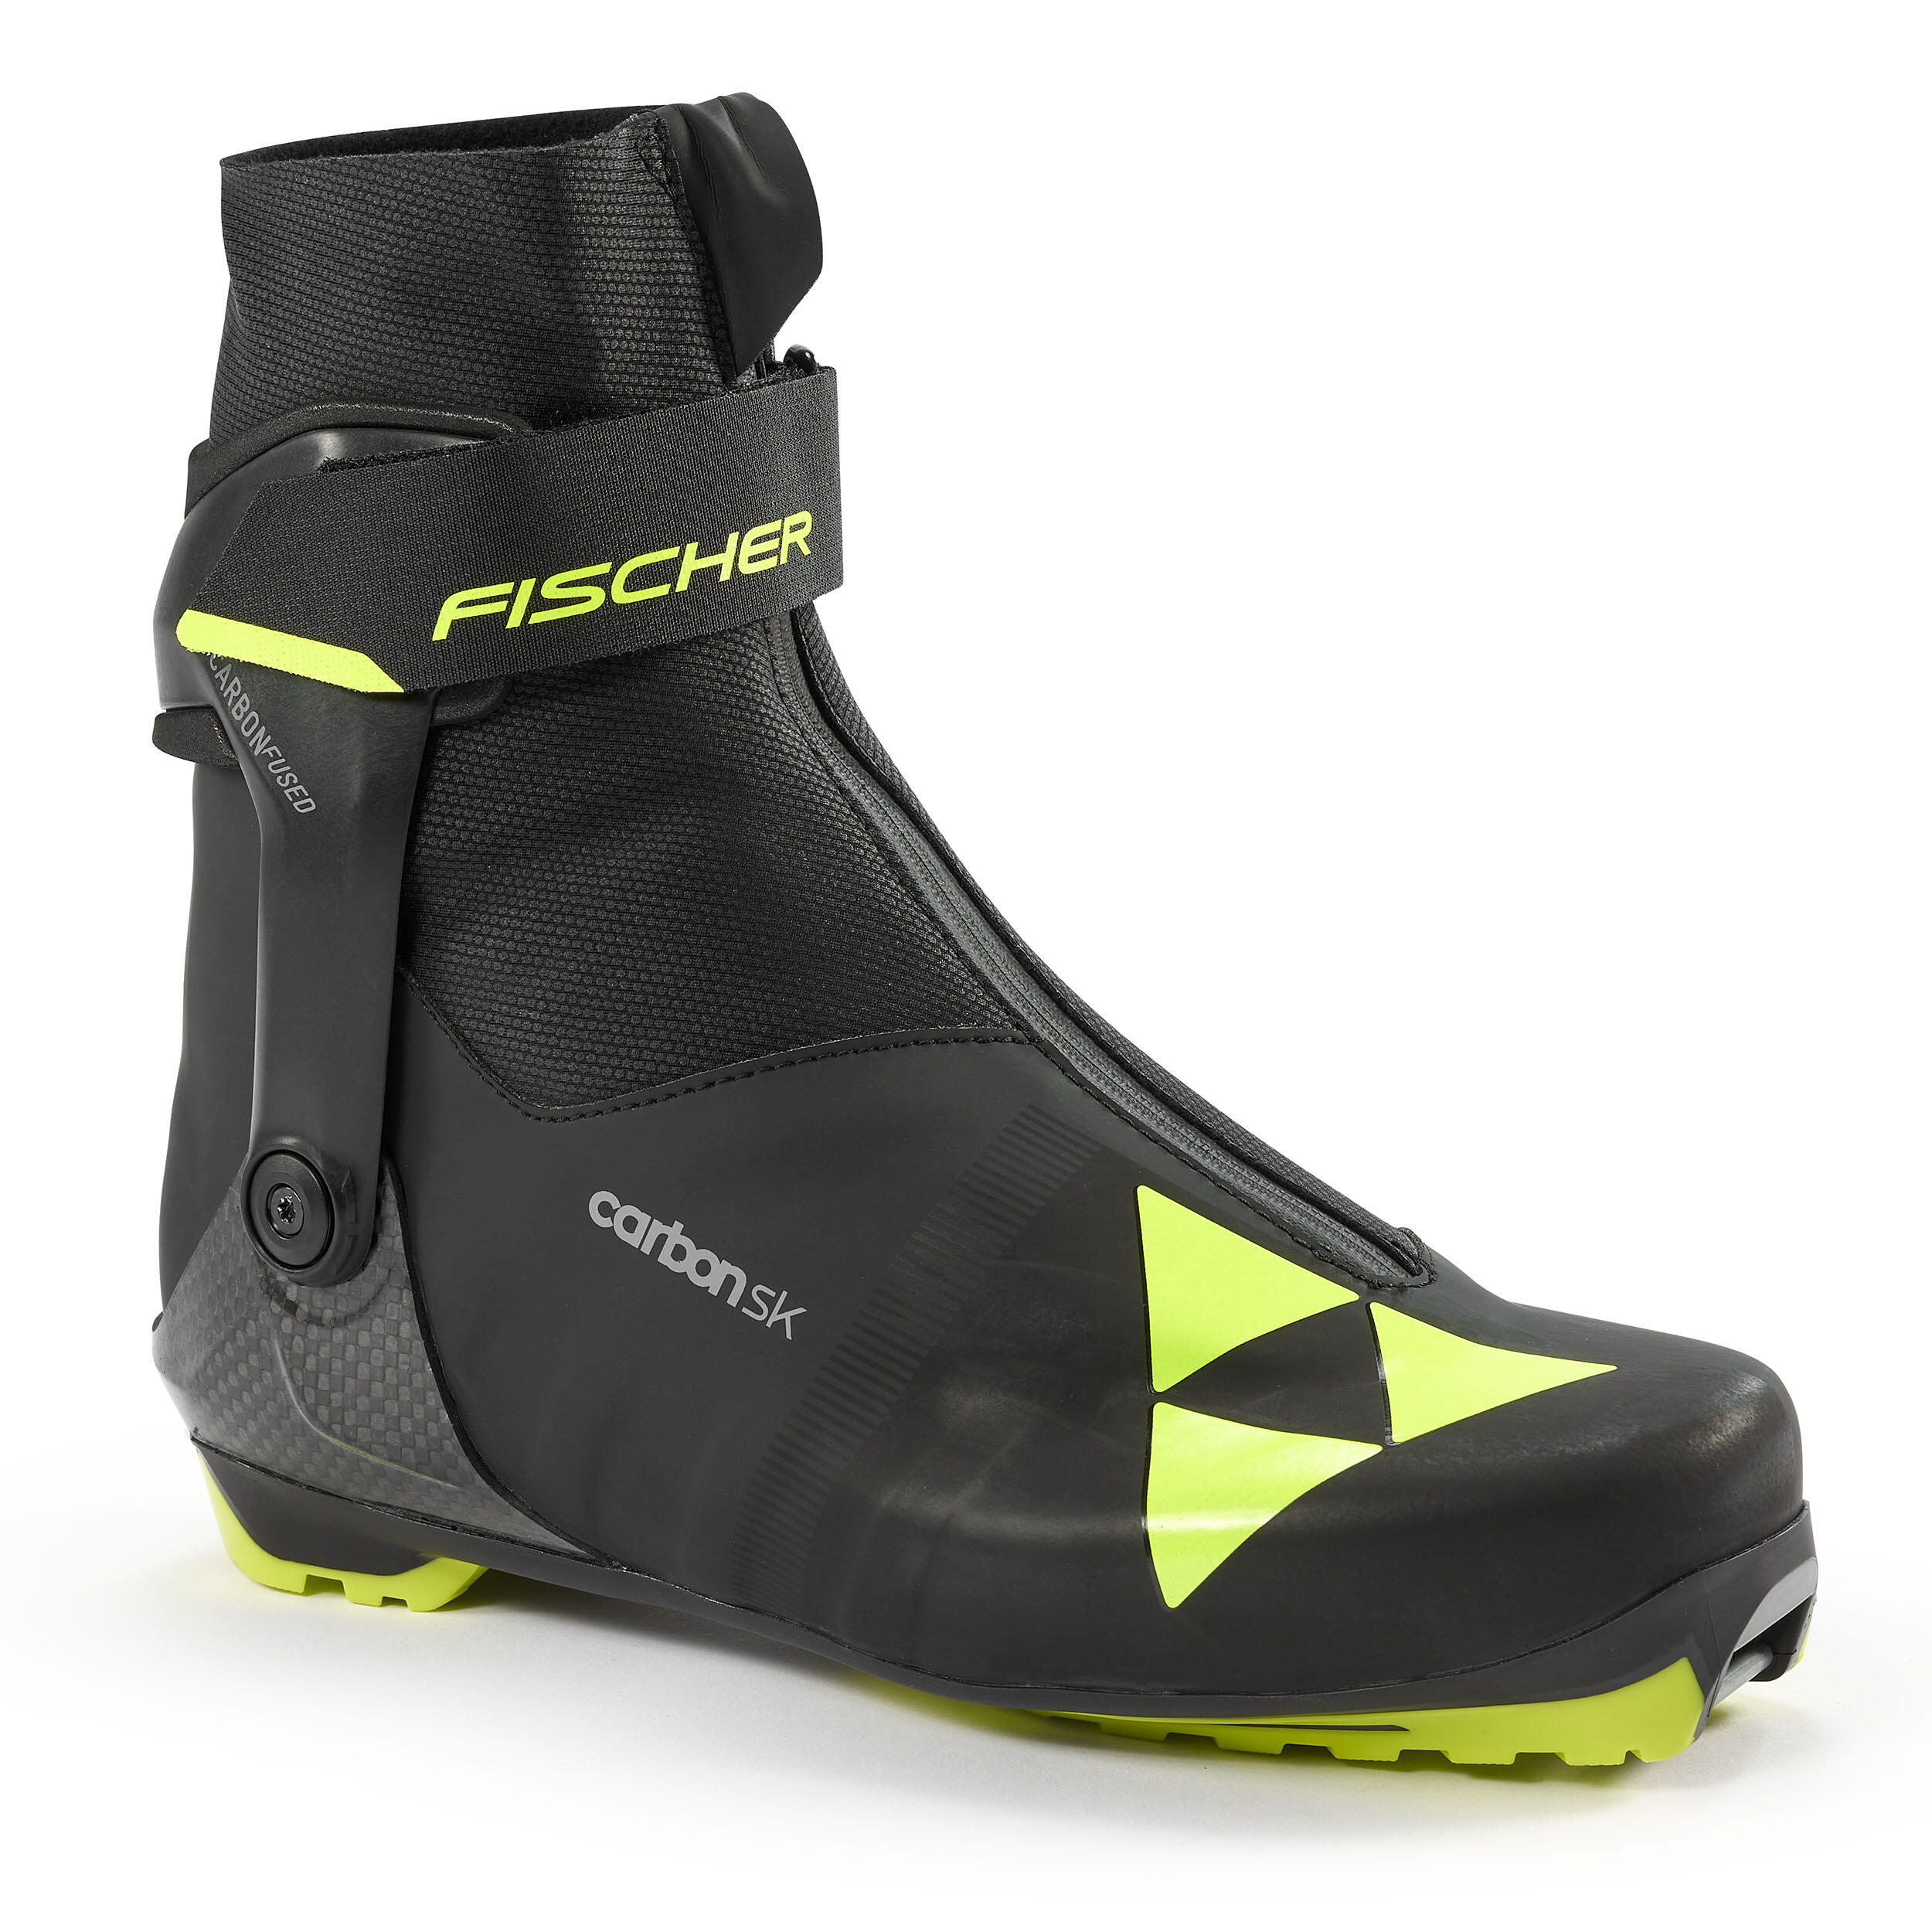 CROSS-COUNTRY SKI SKATING BOOTS - FISCHER CARBON 1/7